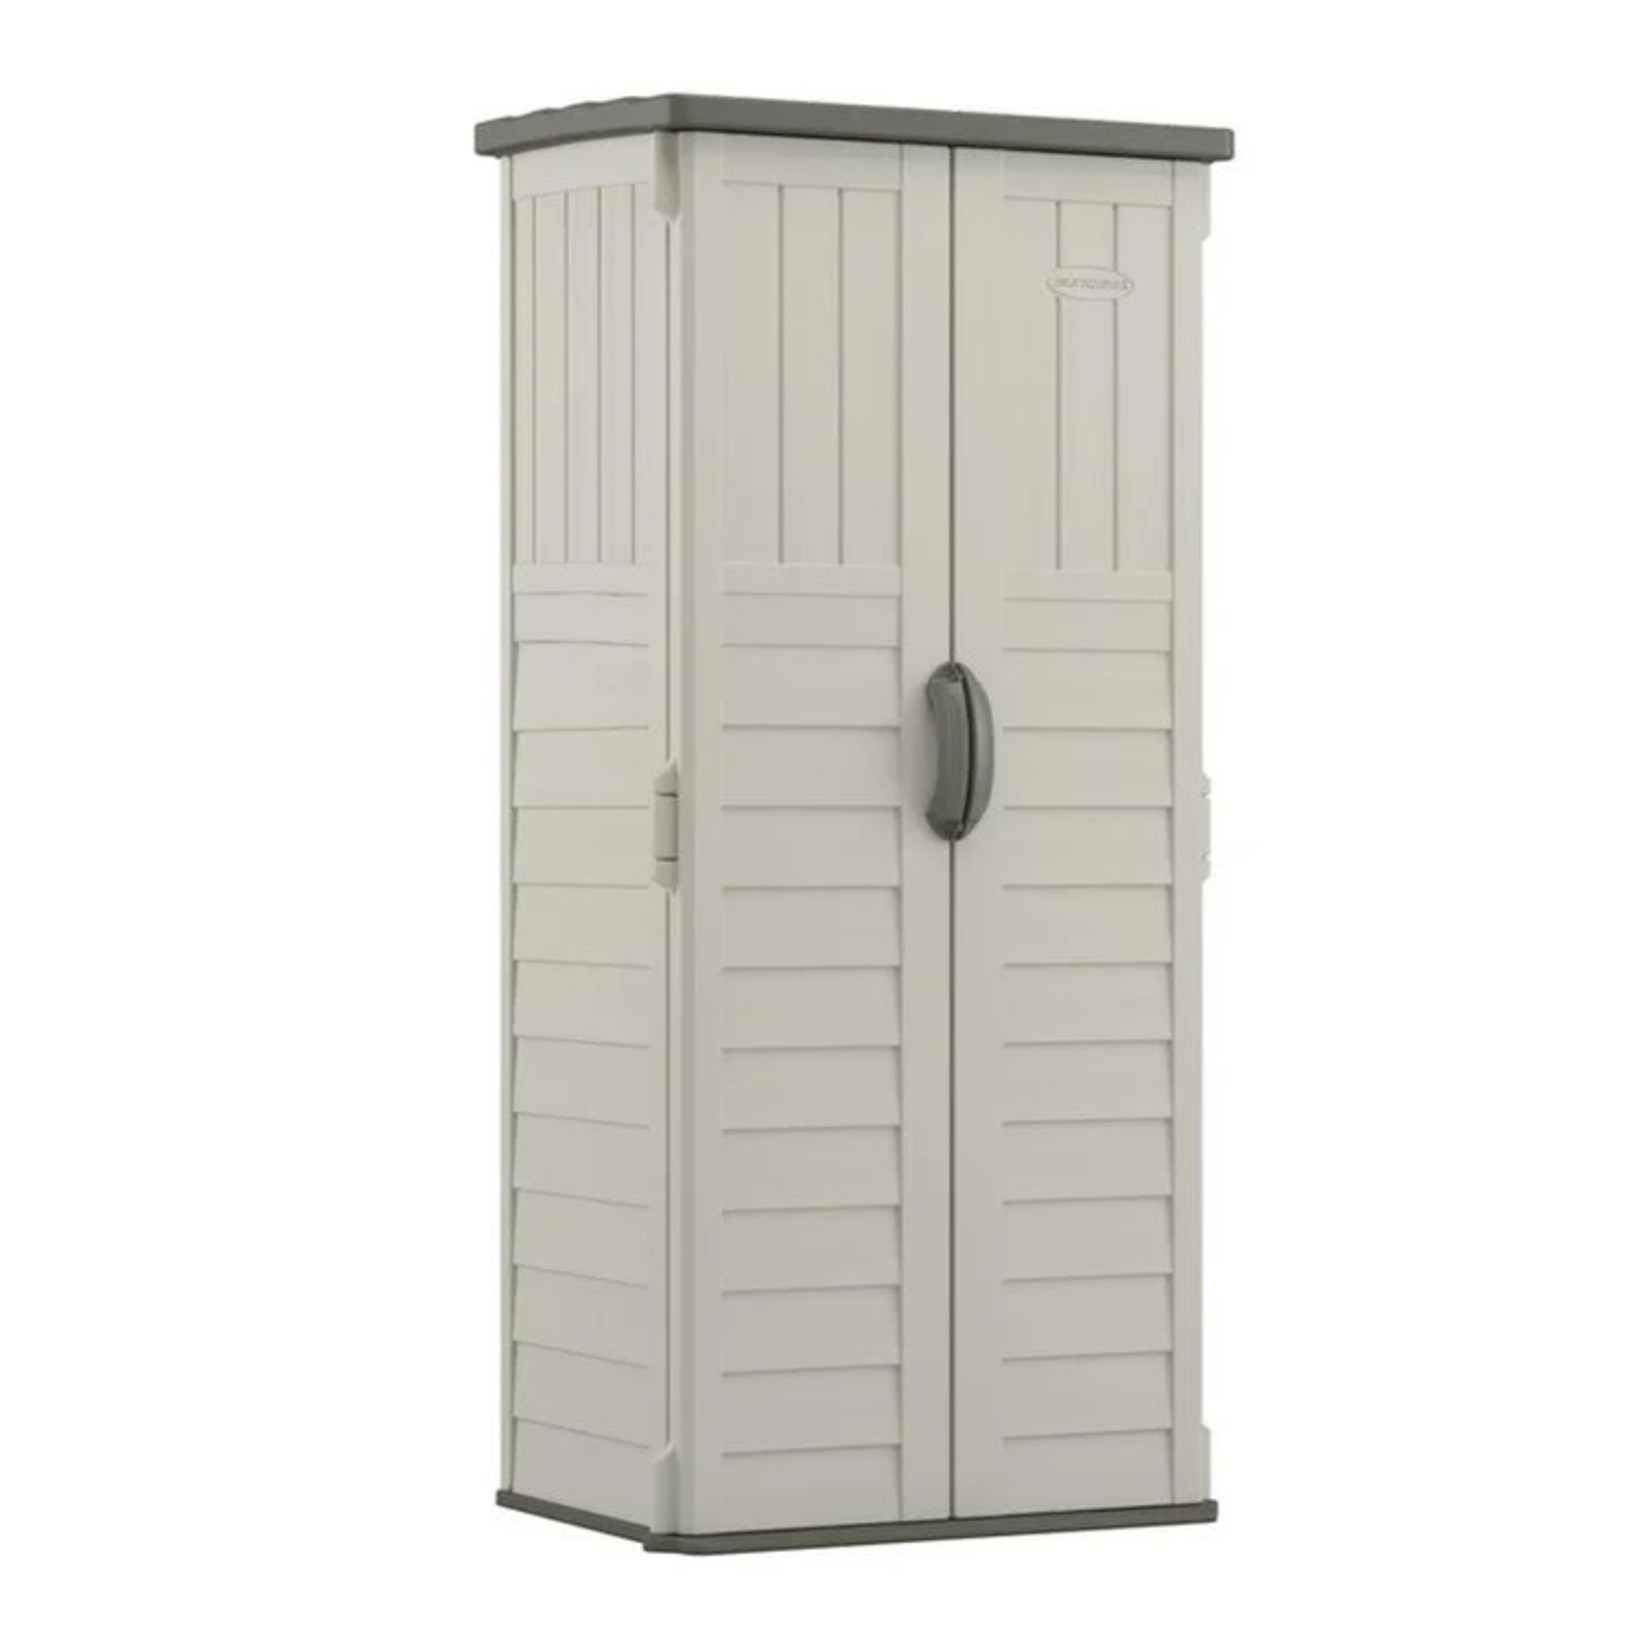 *2'8 1/4" W x 6' H Vanilla Resin Outdoor Plastic Vertical Tool Shed